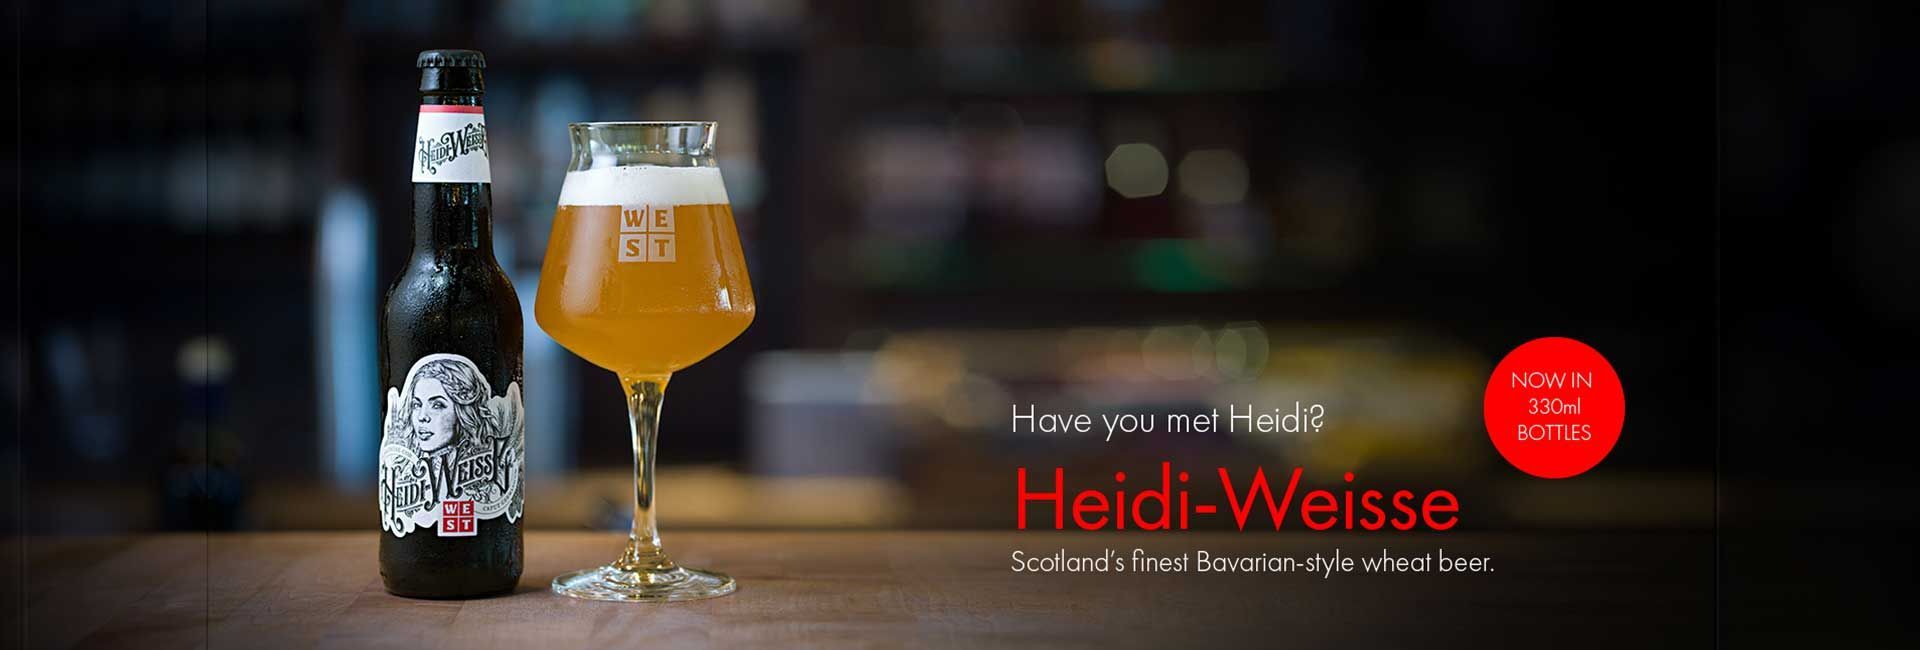 a bottle of heidi weisse next to a glass of beer